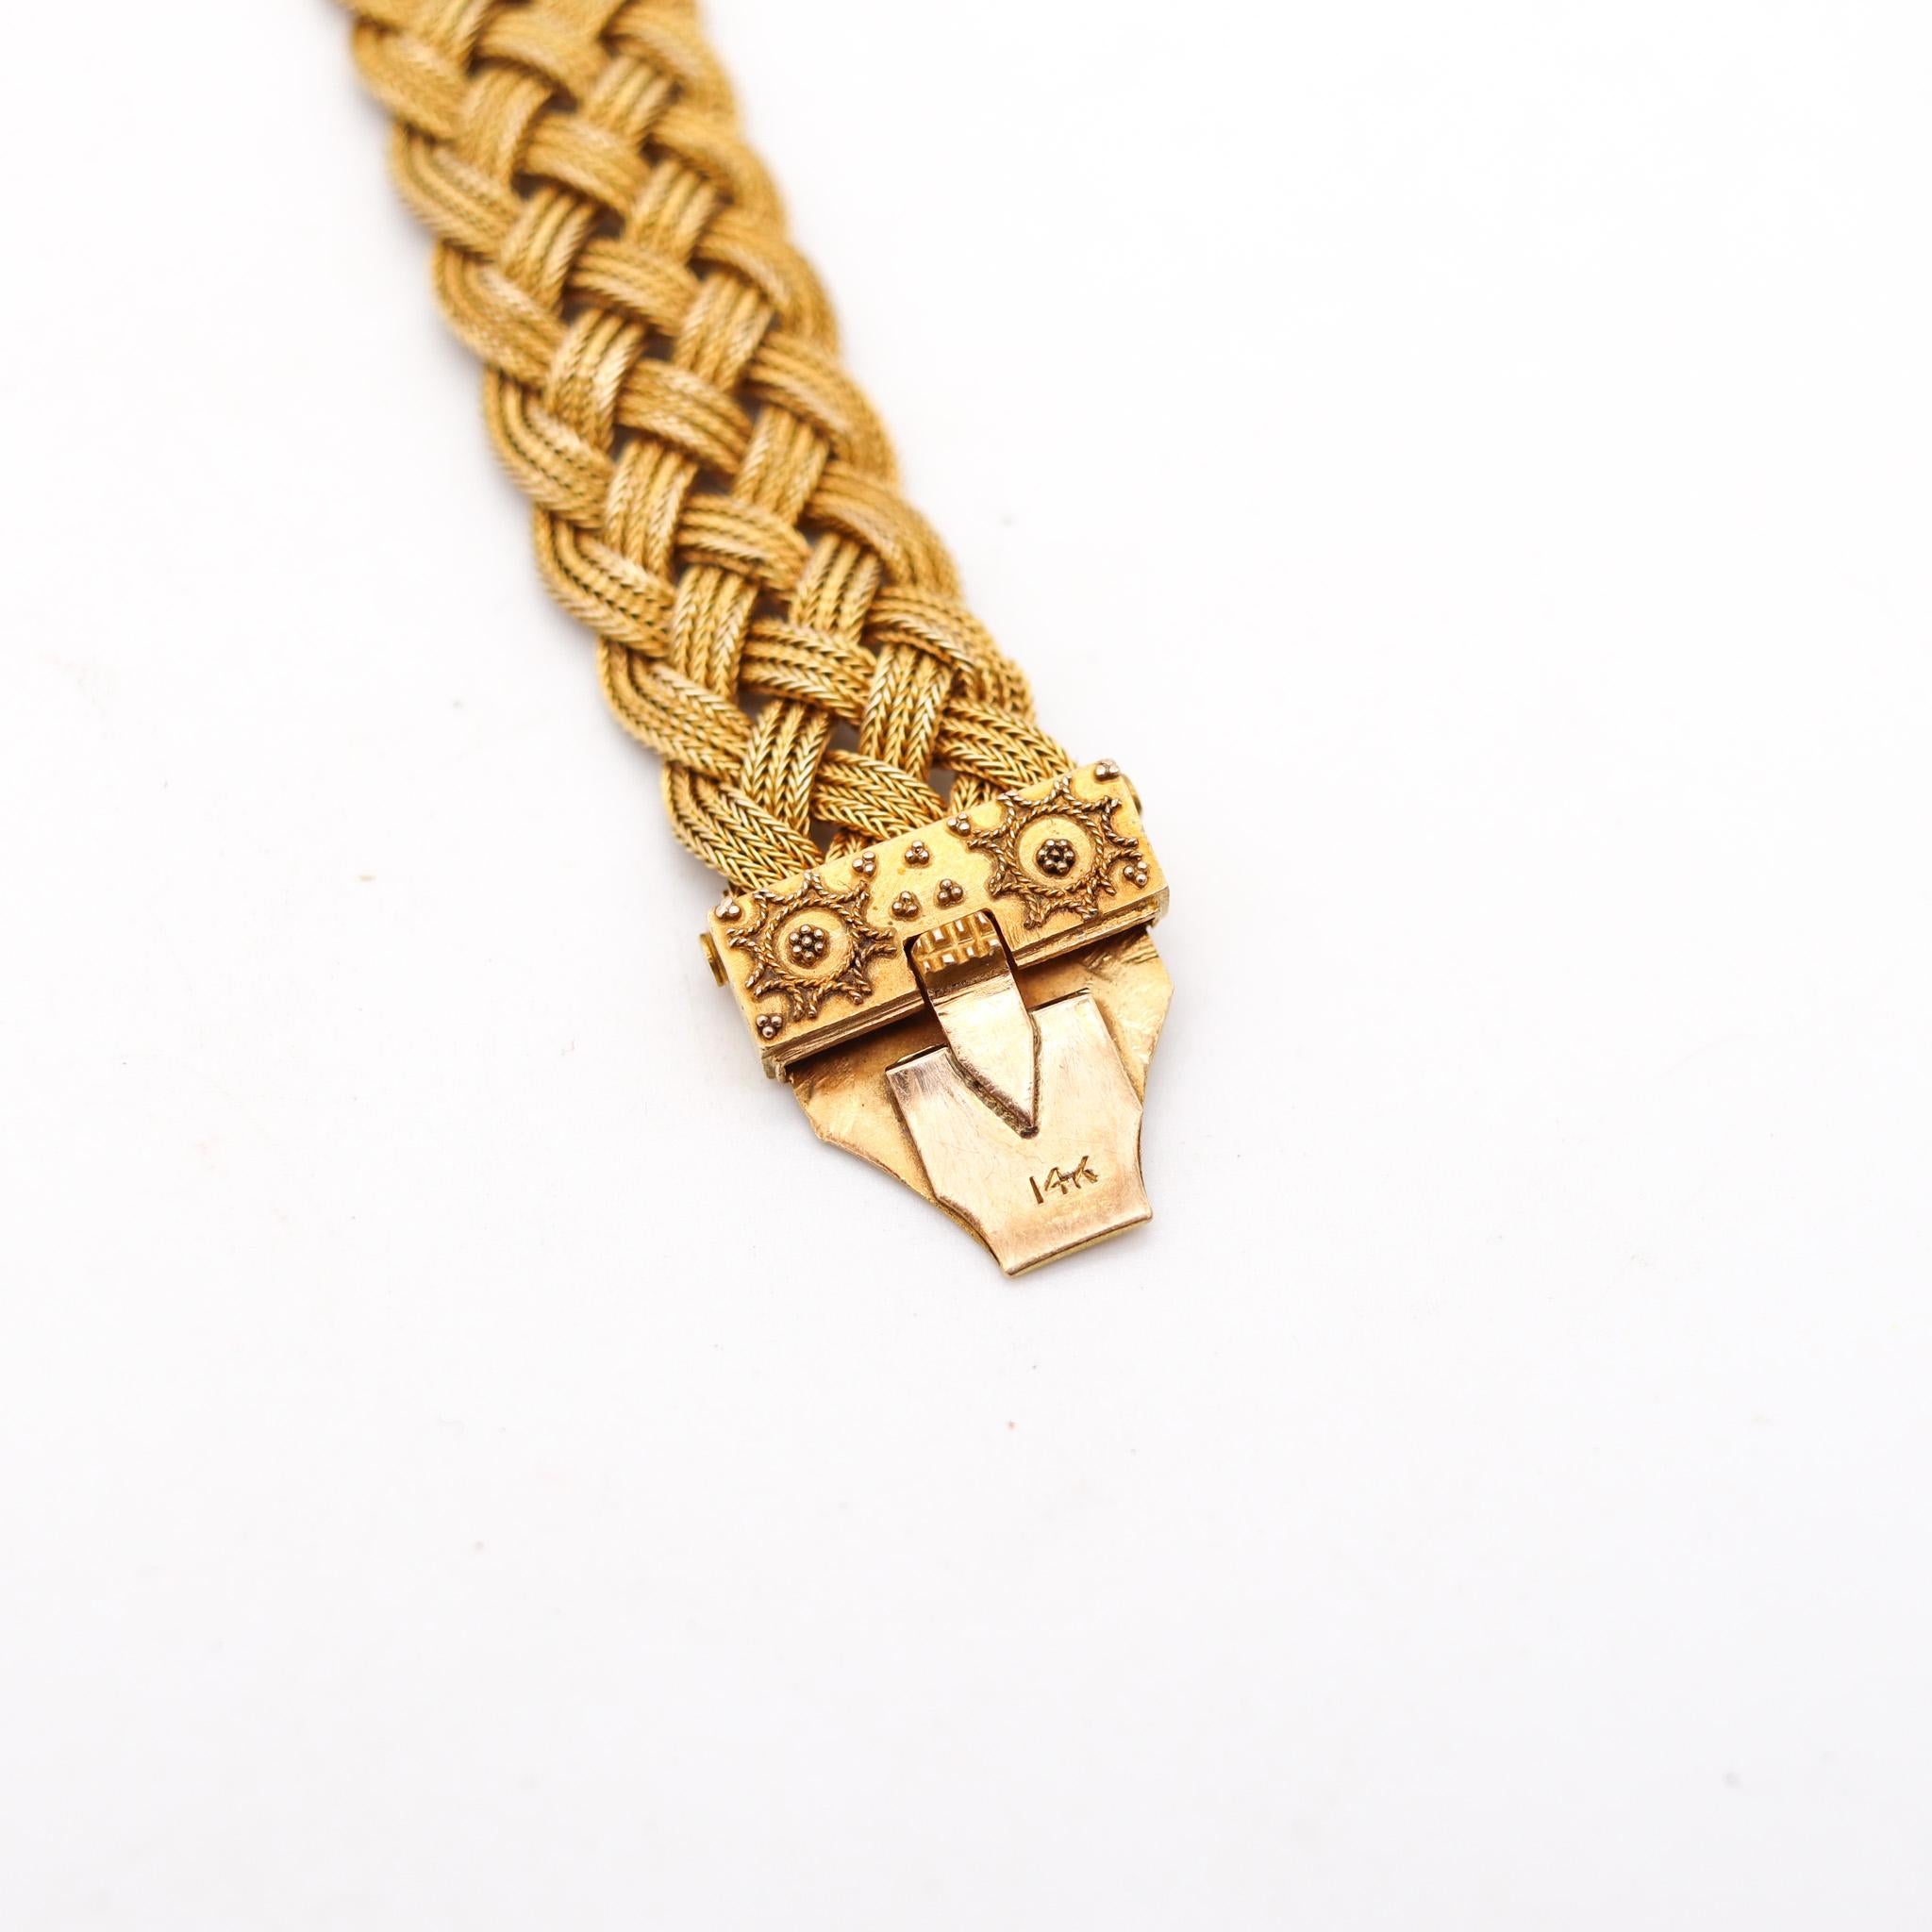 England 1860 Victorian Etruscan Revival Woven Bracelet In 14Kt Yellow Gold For Sale 1